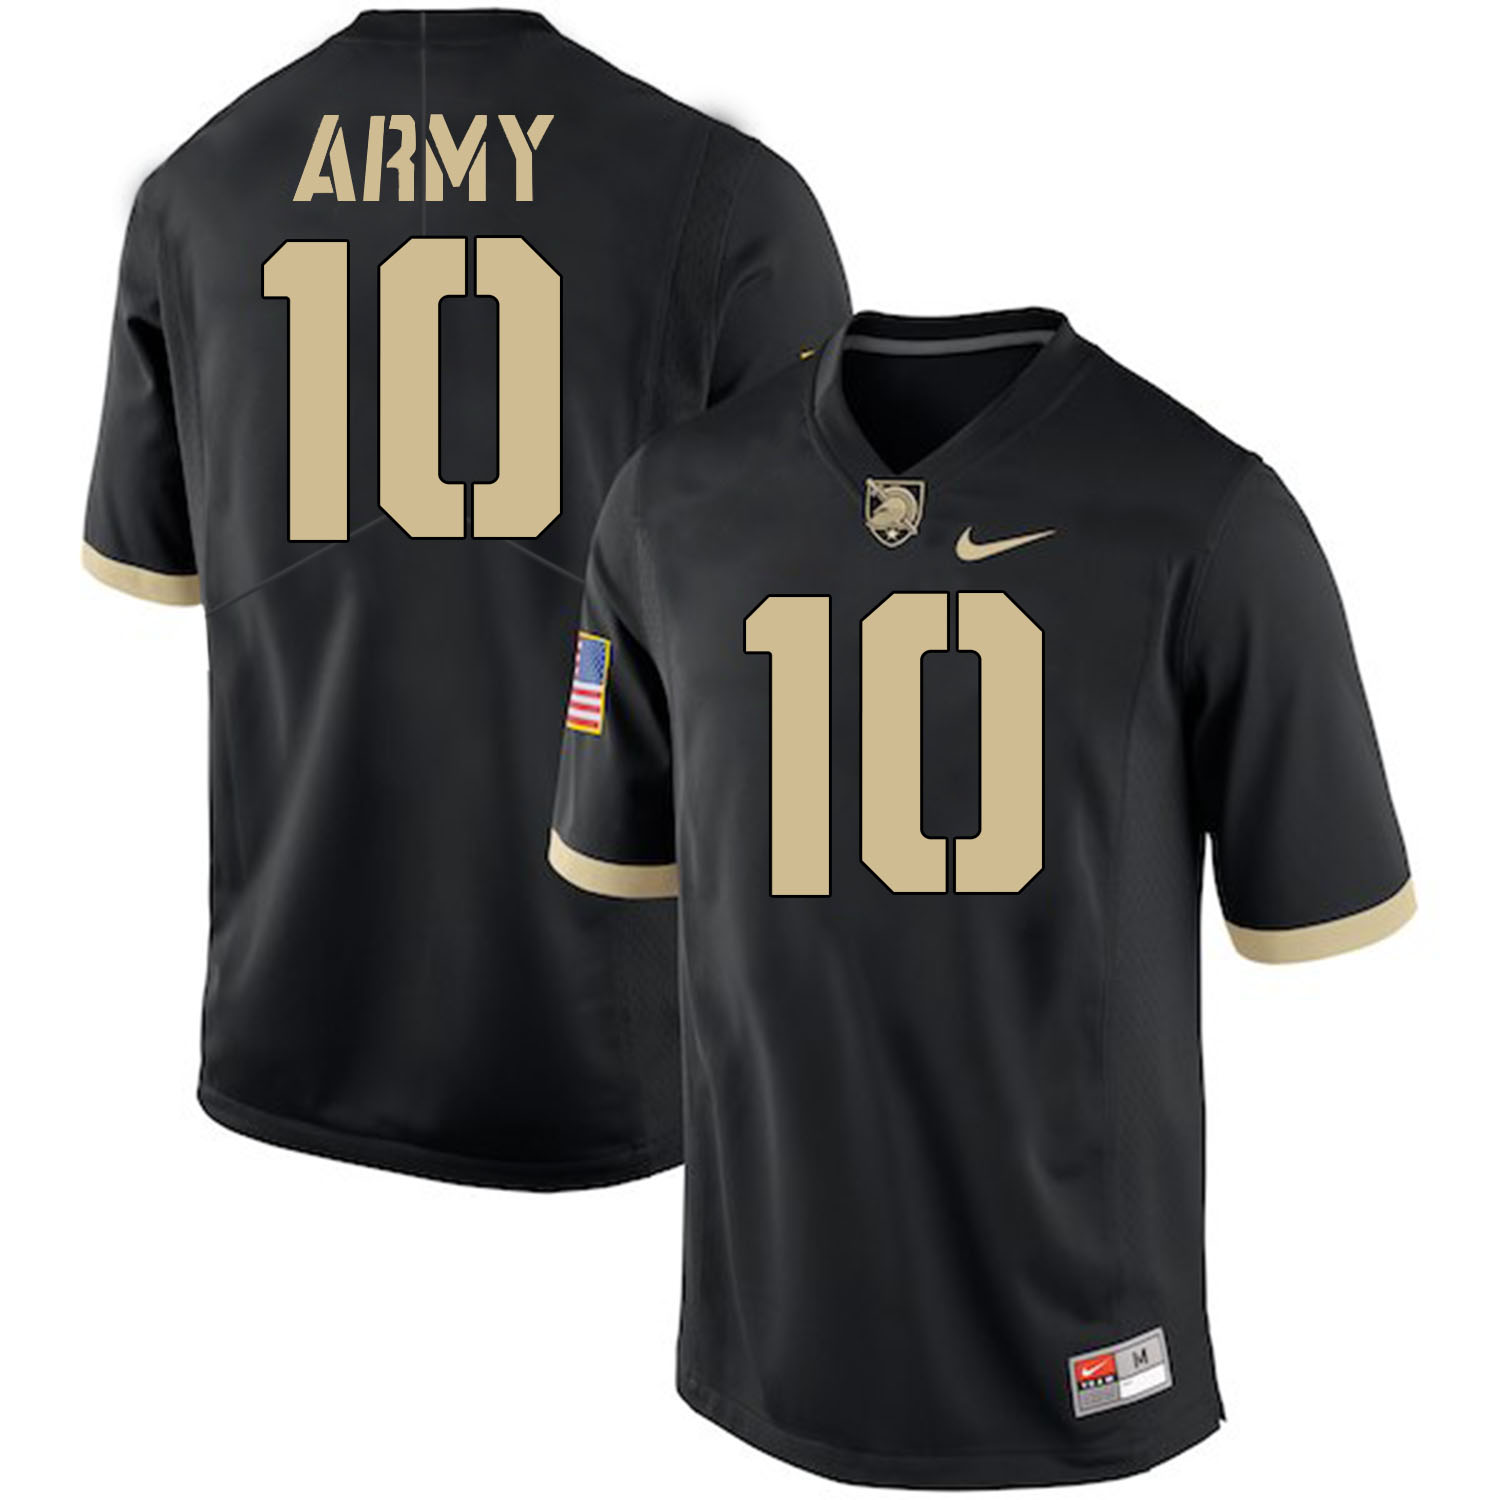 Army Black Knights 10 Mike Reynolds Black College Football Jersey